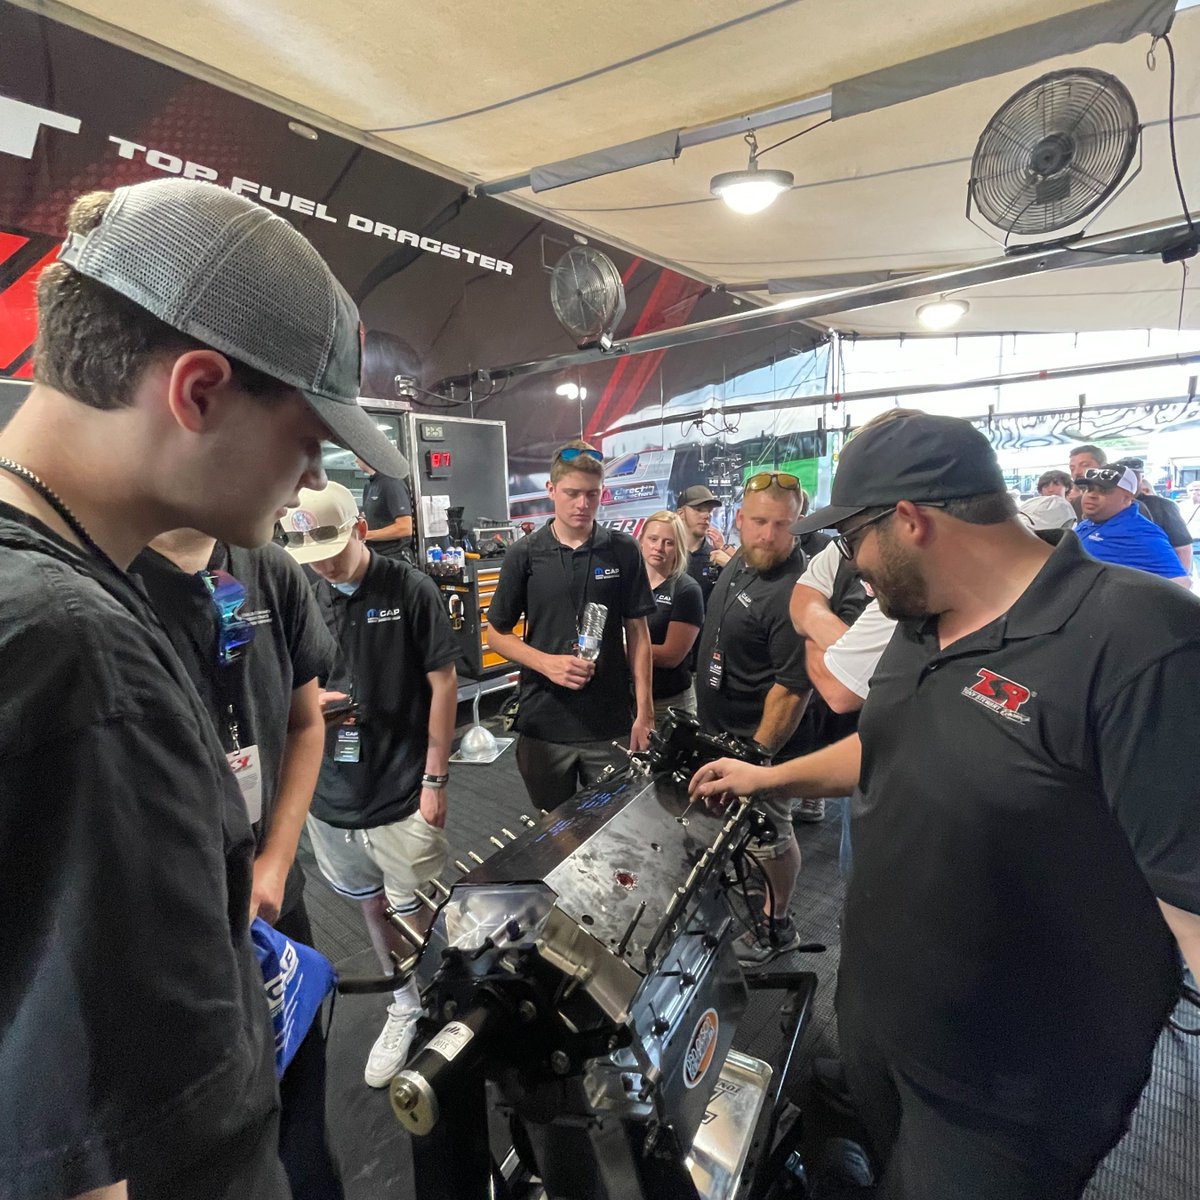 Our Mopar Career Automotive Program (CAP) students got a first-hand look at their future career as they talked with the @tsrnitro team and networked with local Stellantis dealerships at @NHRA Arizona Nats this past weekend. Learn more about Mopar CAP at moparcap.com.